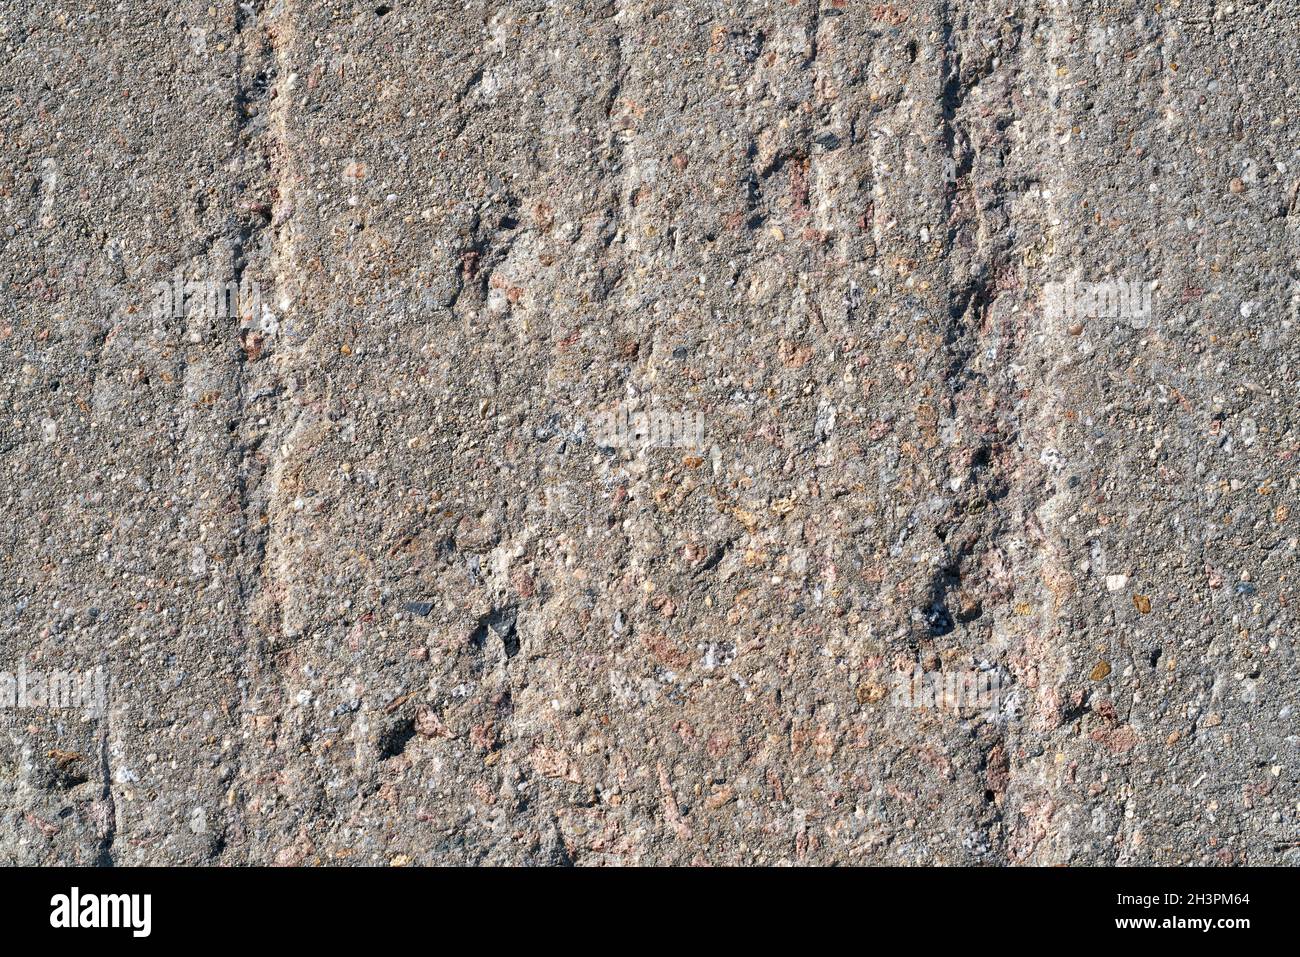 Grooves in a wall of concrete on a structure made of concrete Stock Photo